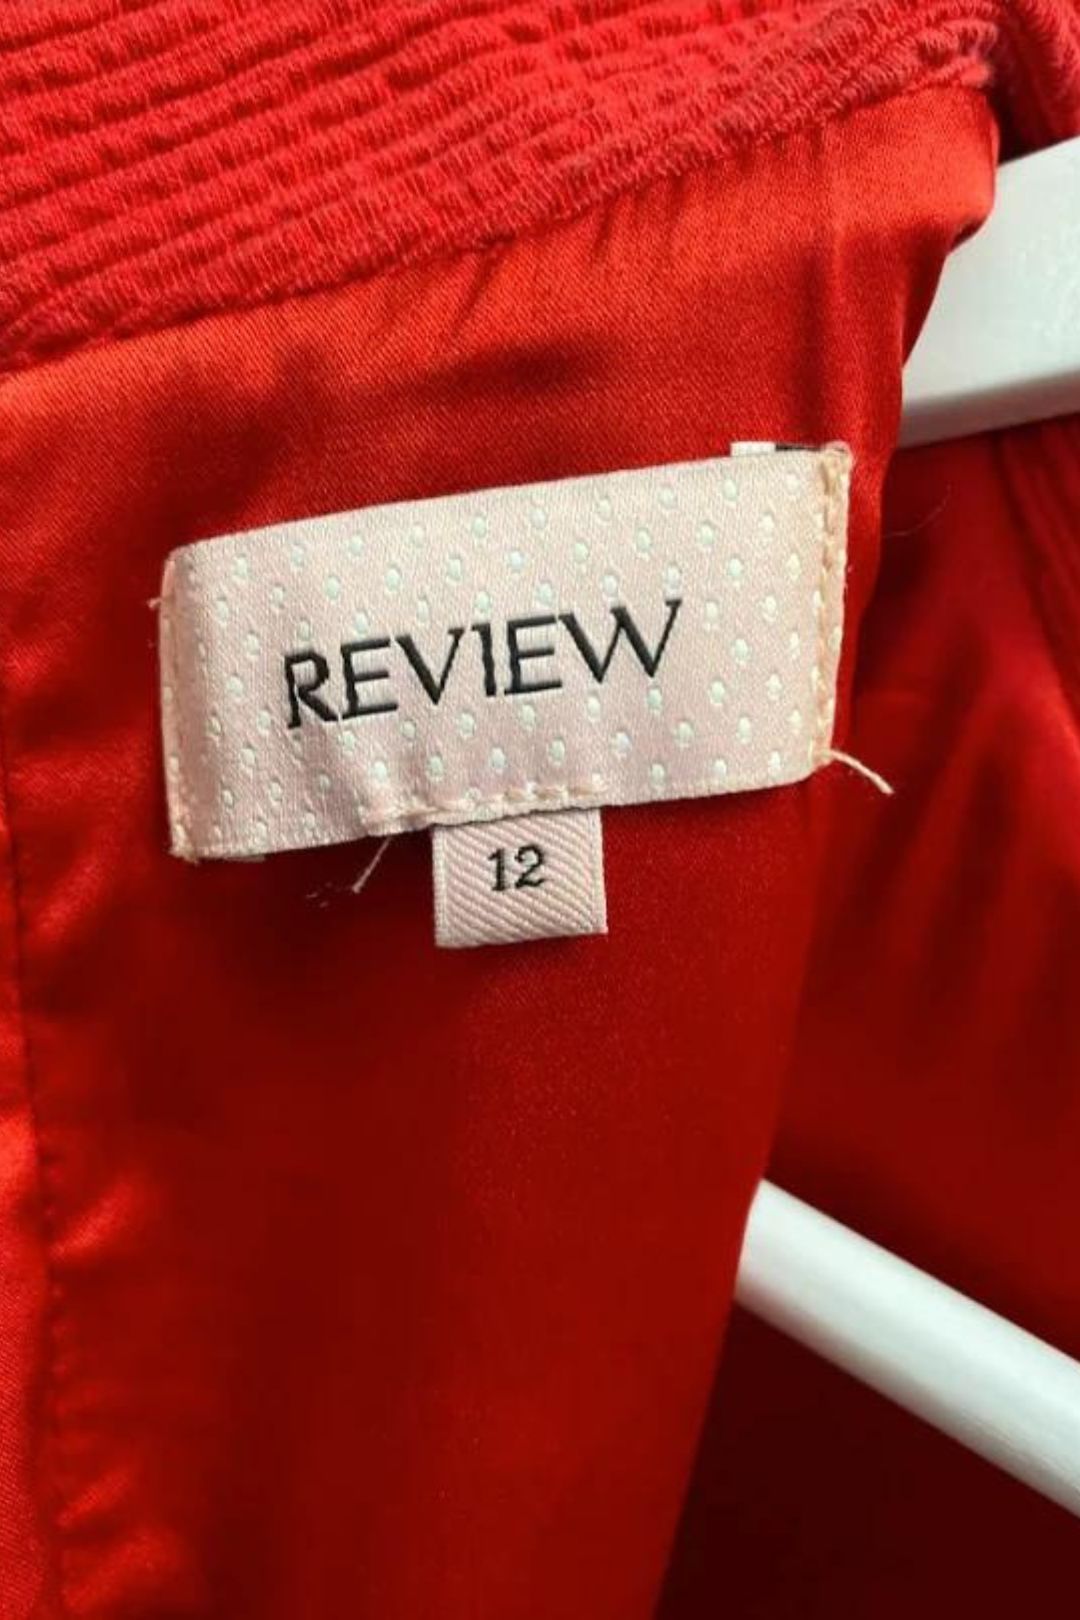 Review - Girls Red High Neck Dress